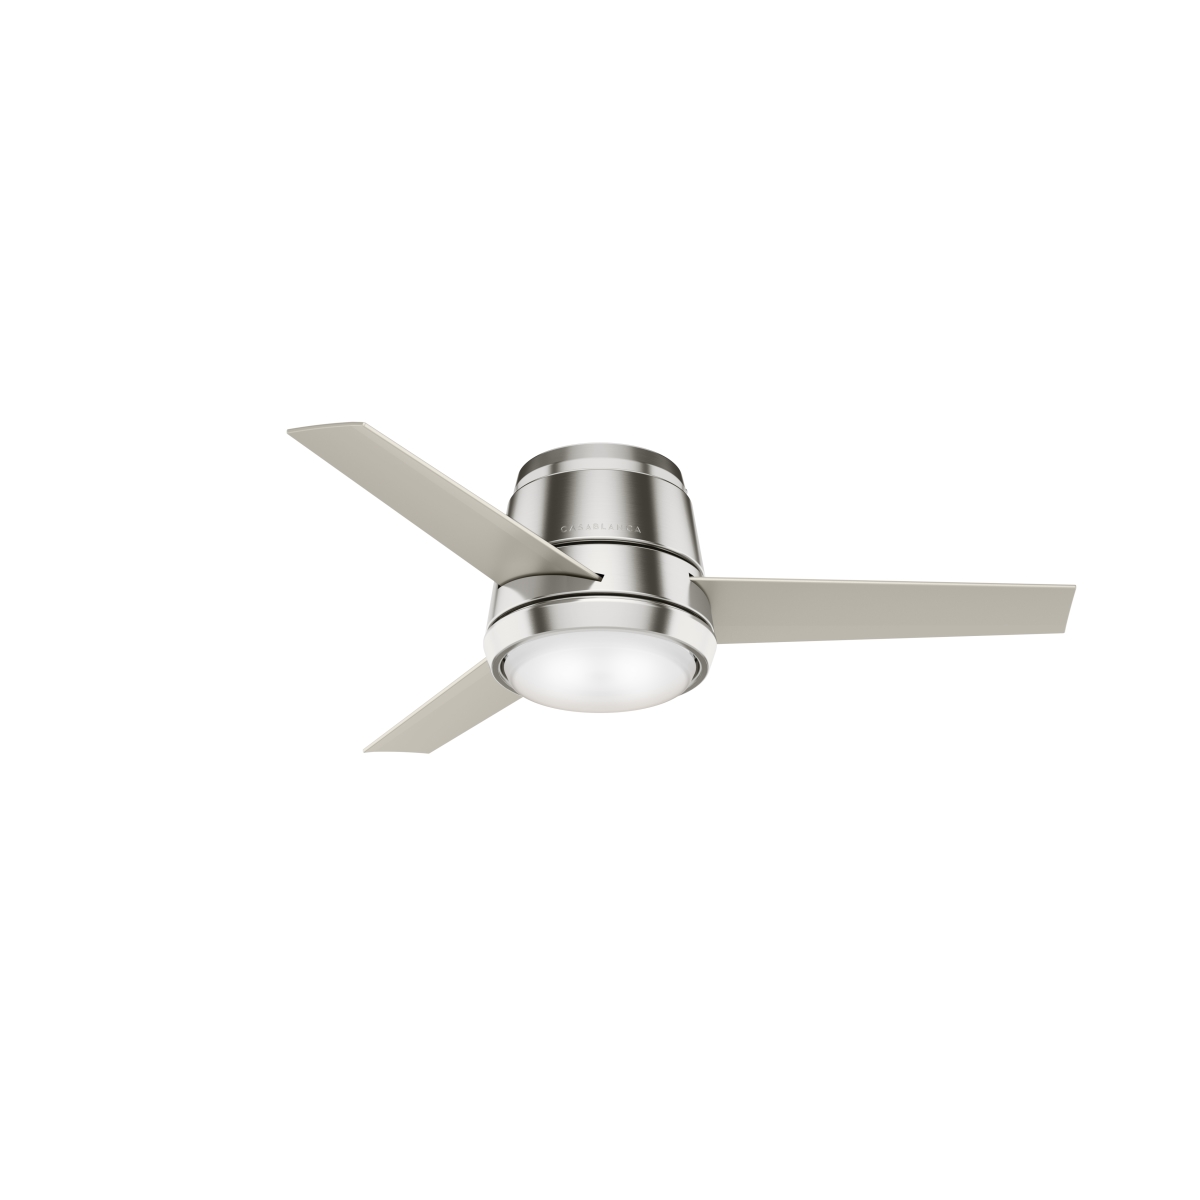 Picture of Casablanca 59570 44 in. Commodus Brushed Nickel Low Profile Ceiling Fan with LED Light Kit & Wall Control